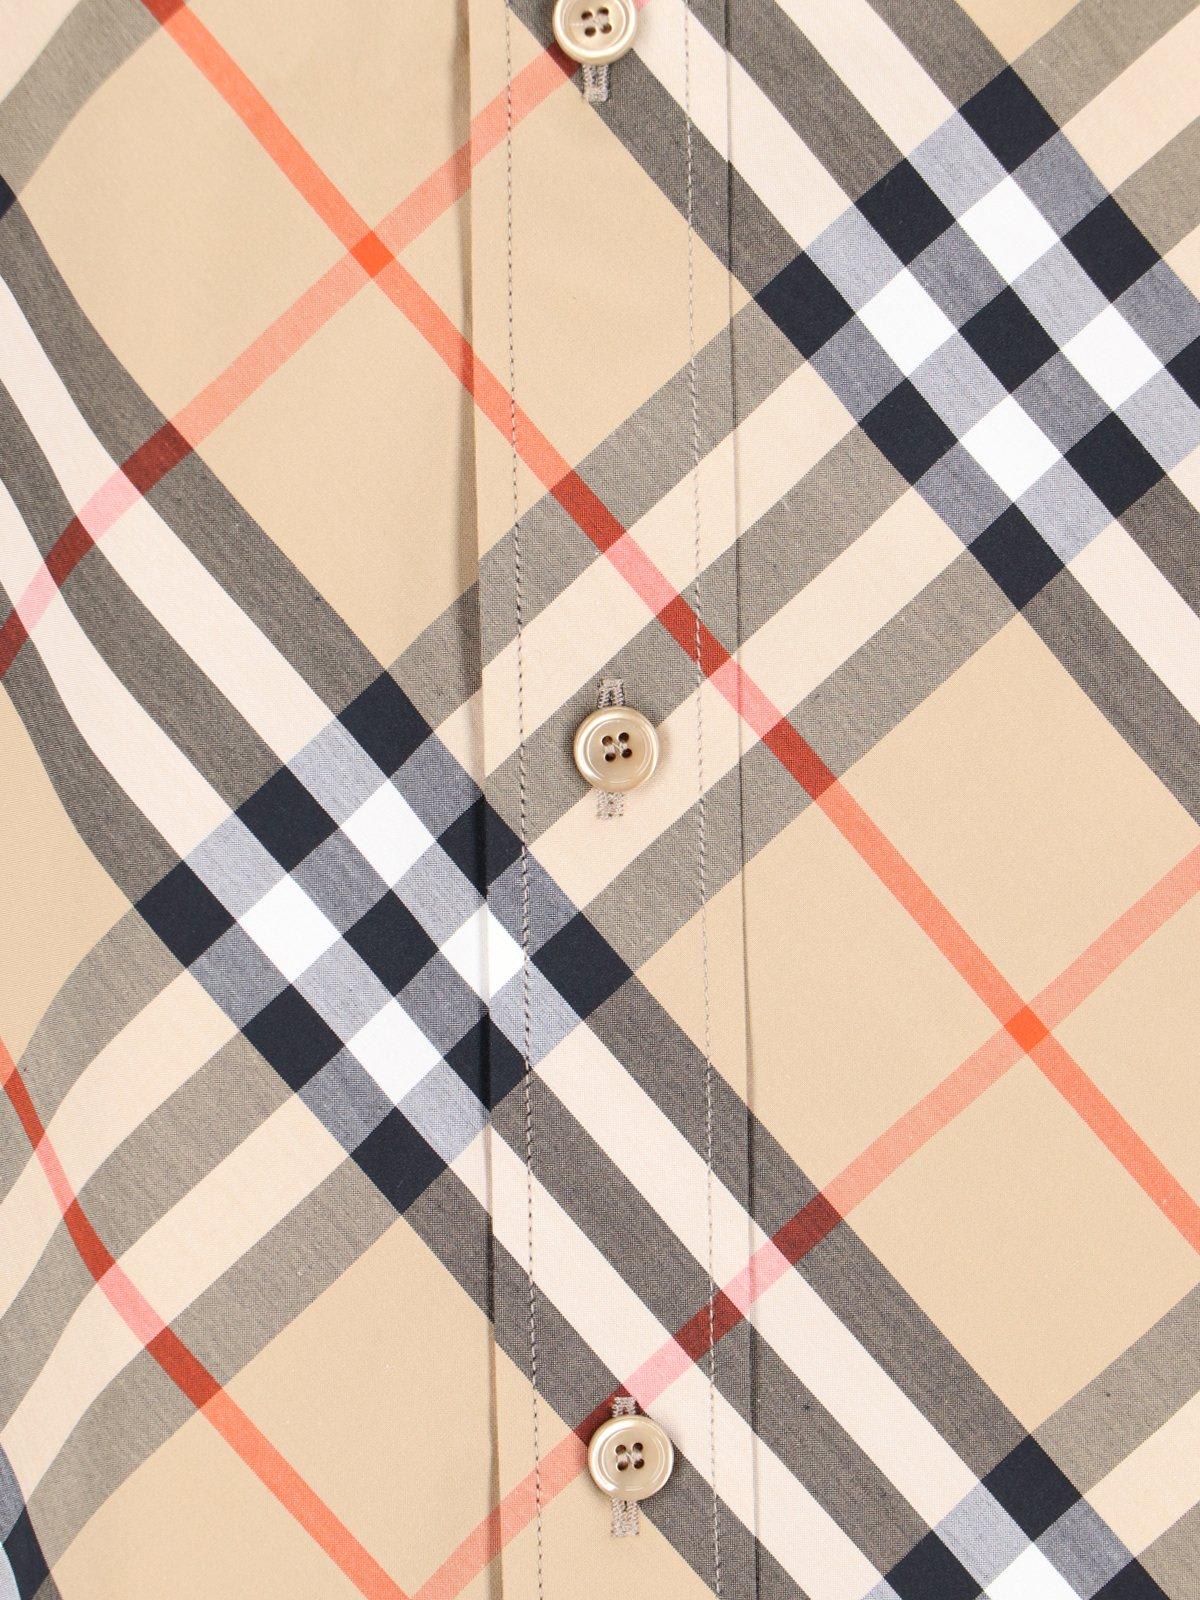 Shop Burberry Short Sleeved Checked Shirt In Neutrals